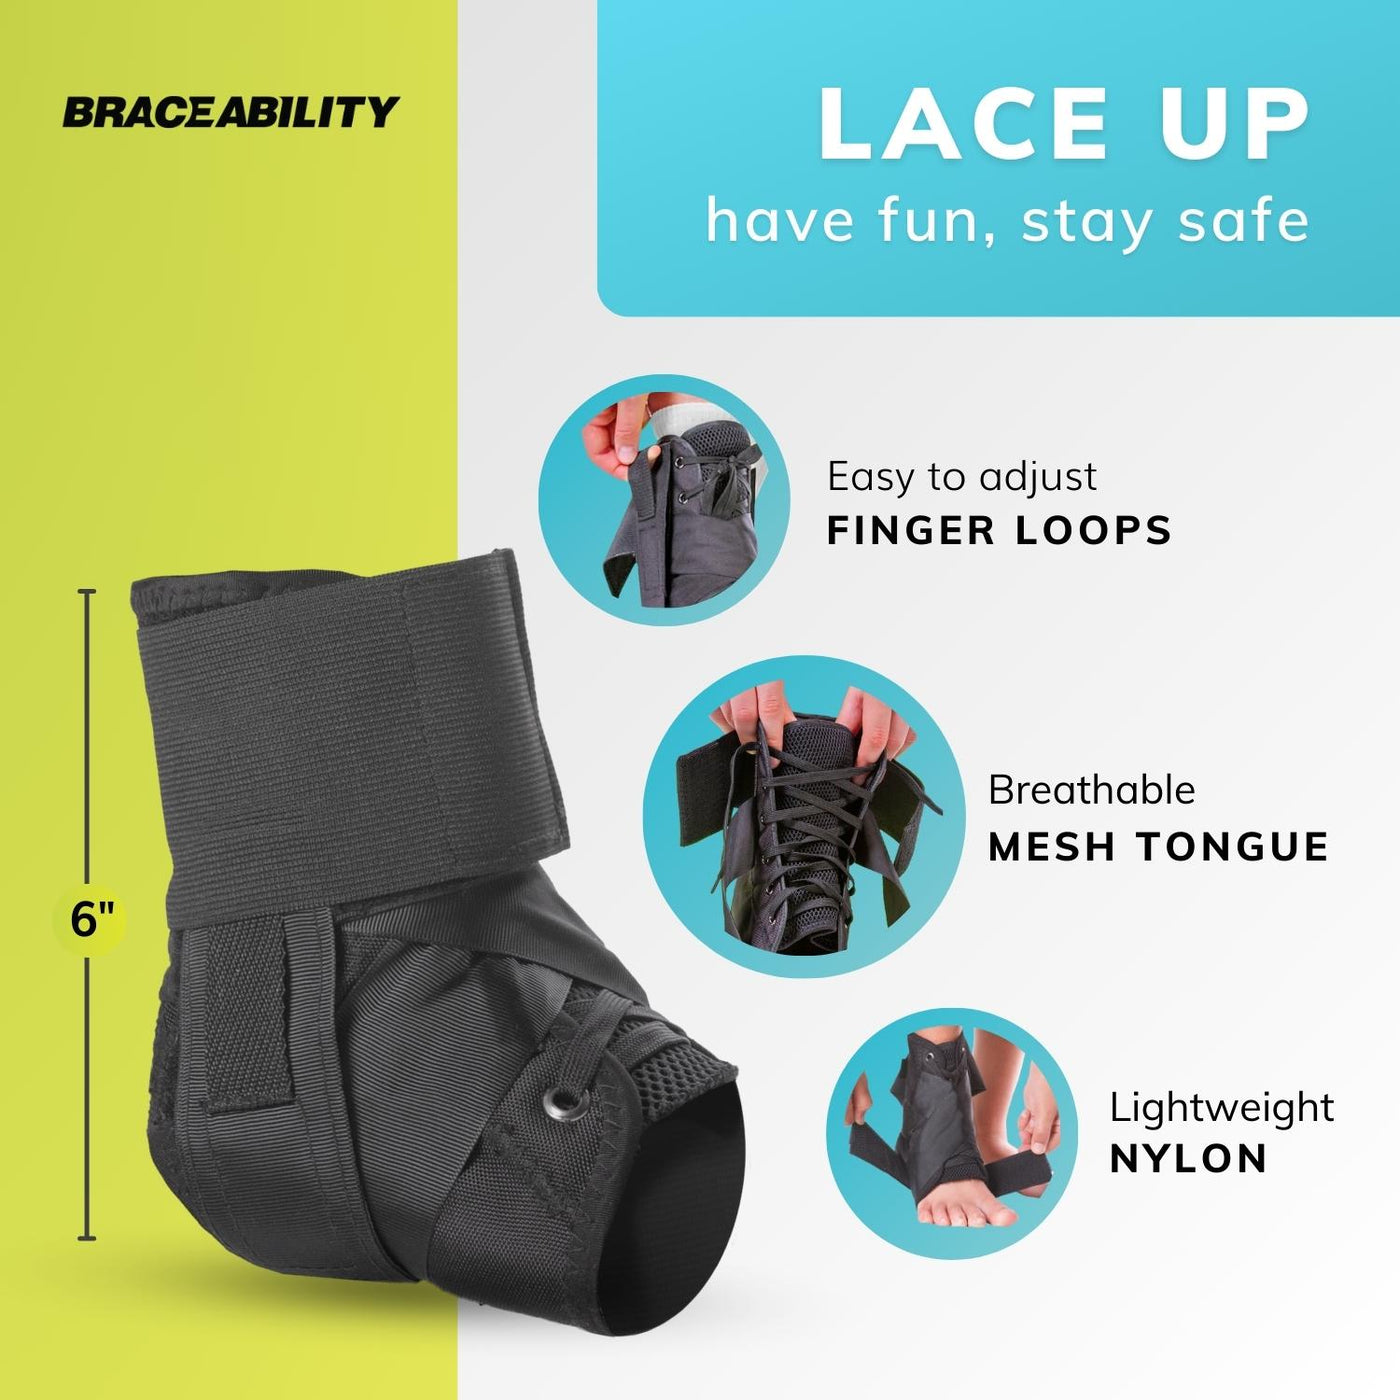 Our lace up ankle brace for kids has shoe strings to give you the most stable fit